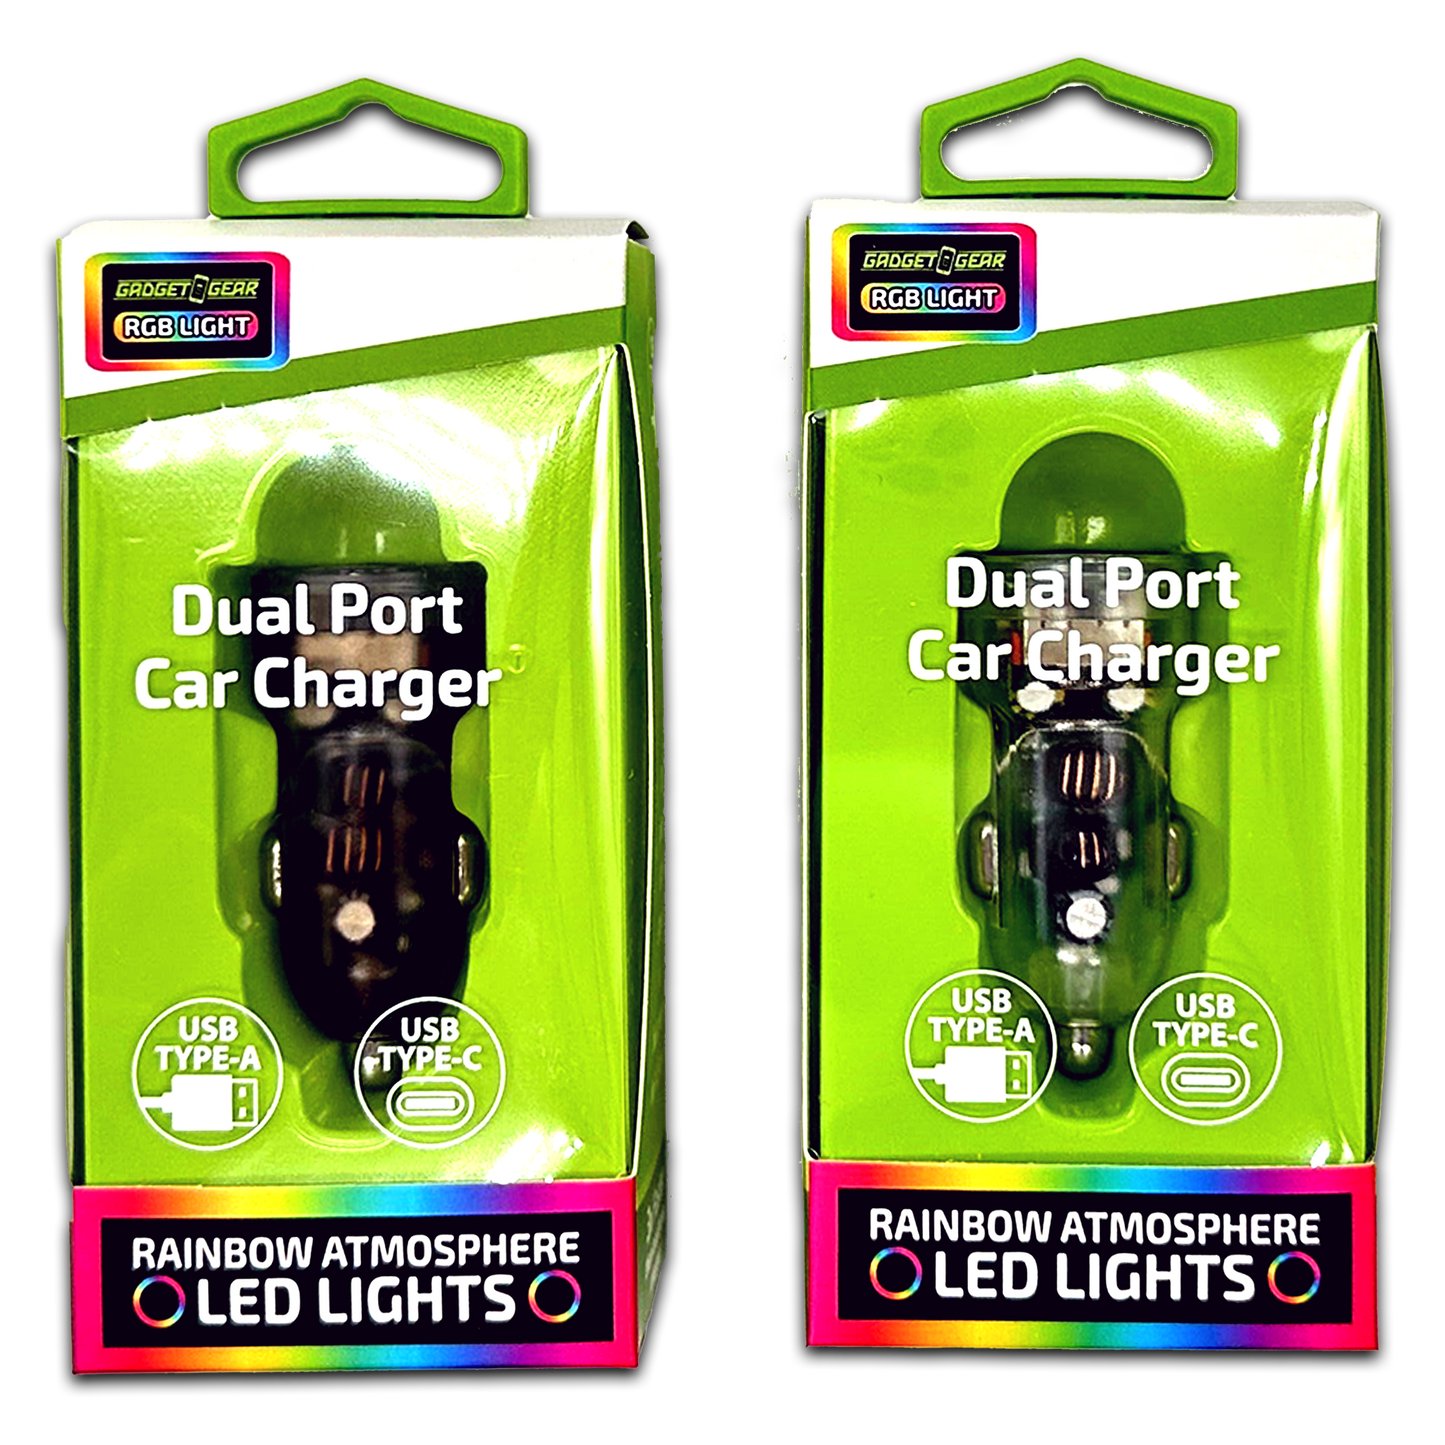 ITEM NUMBER 023878 USB AND USB-C DUAL DC LIGHT-UP CAR CHARGER 6 PIECES PER DISPLAY